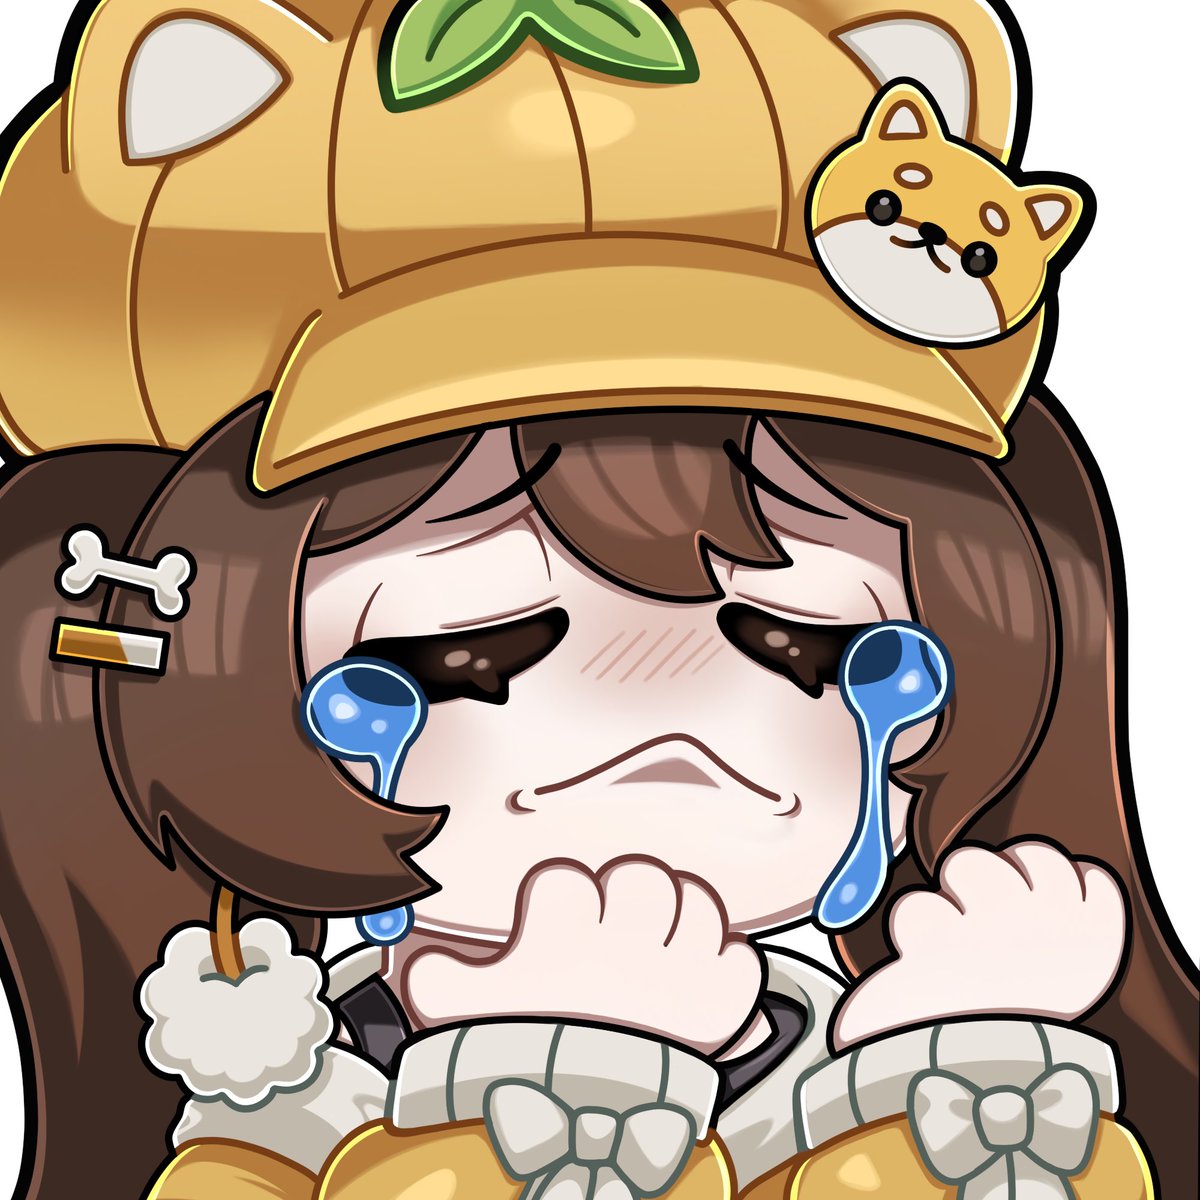 I should be back tomorrow if all things go well and I feel up to it. 

Past few days have been rough but I’m starting to feel like myself again, stomach is less on edge and I don’t feel like throwing up my insides lol. 

I wanna get back to streaming I miss you guys!! 🥺💕💕